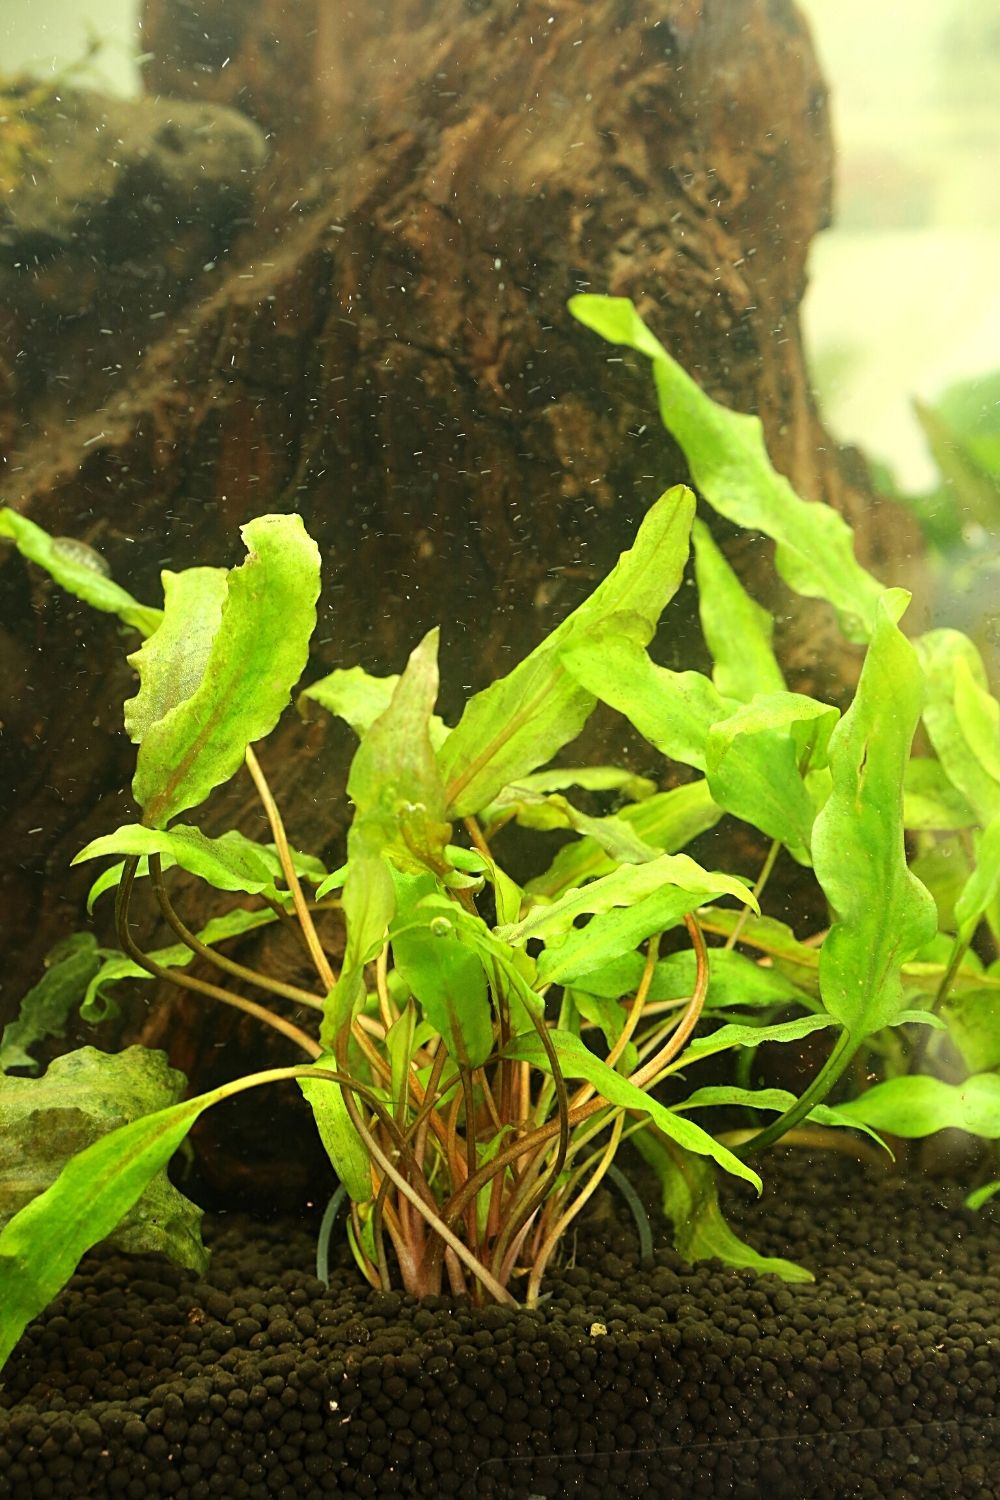 Bucephalandra is an attractive but slow-growing plant that you can grow with your betta fish